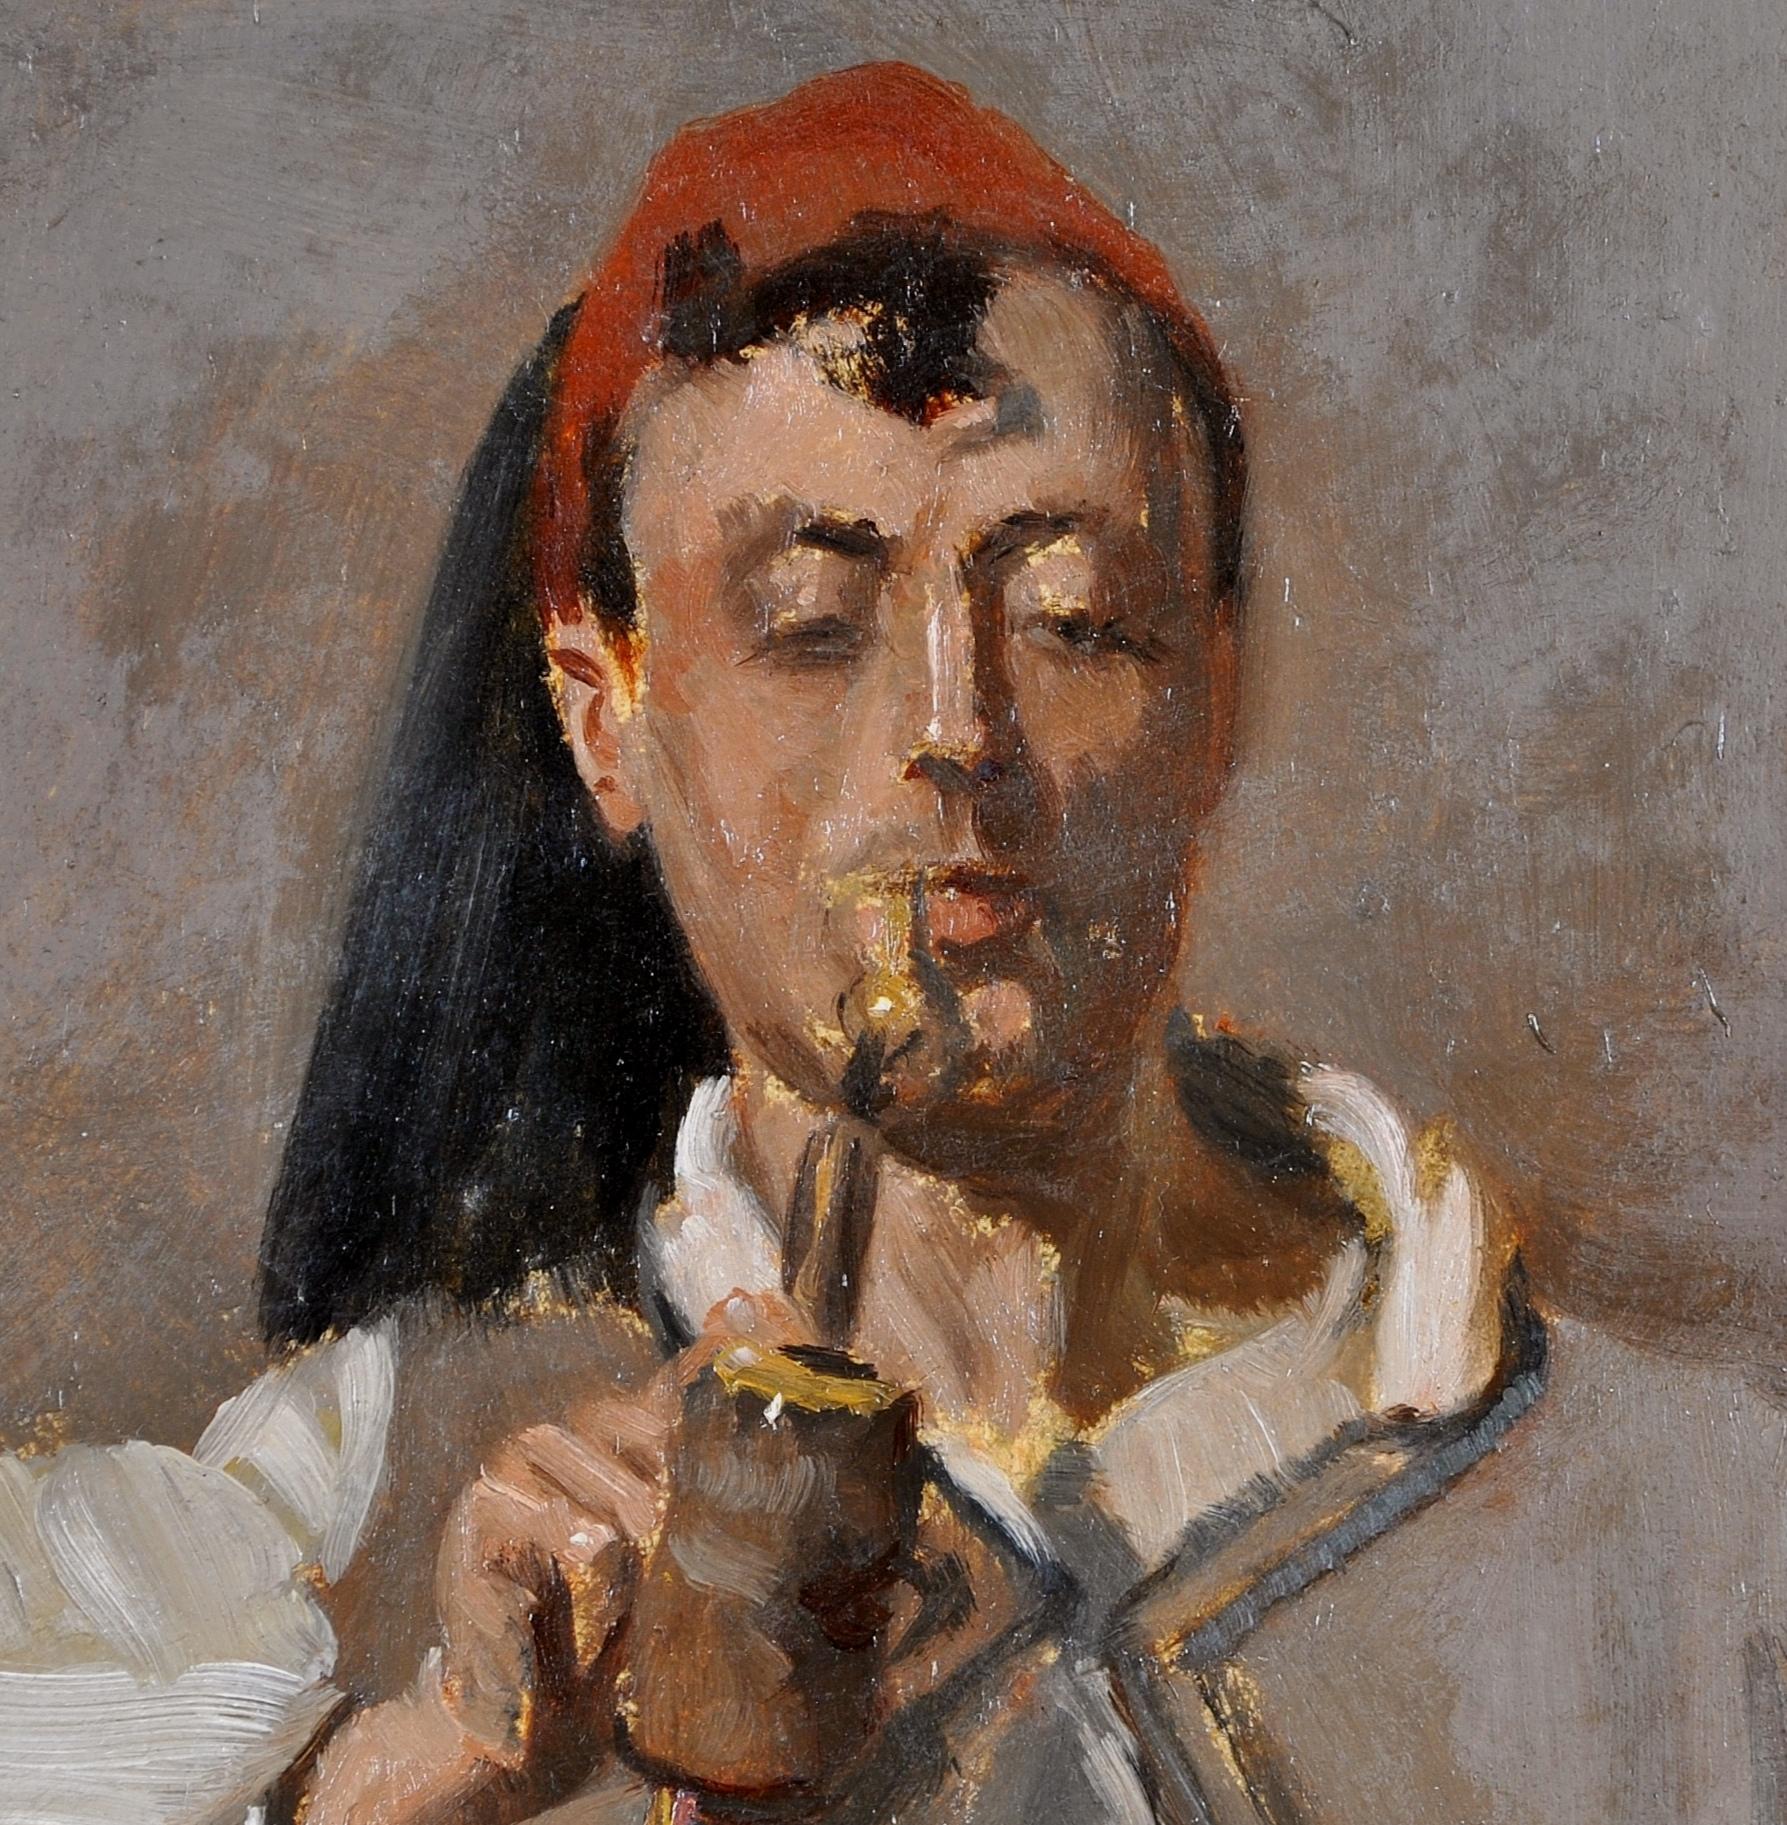 North African Man Smoking a Pipe - Antique British Orientalist Portrait Painting For Sale 4